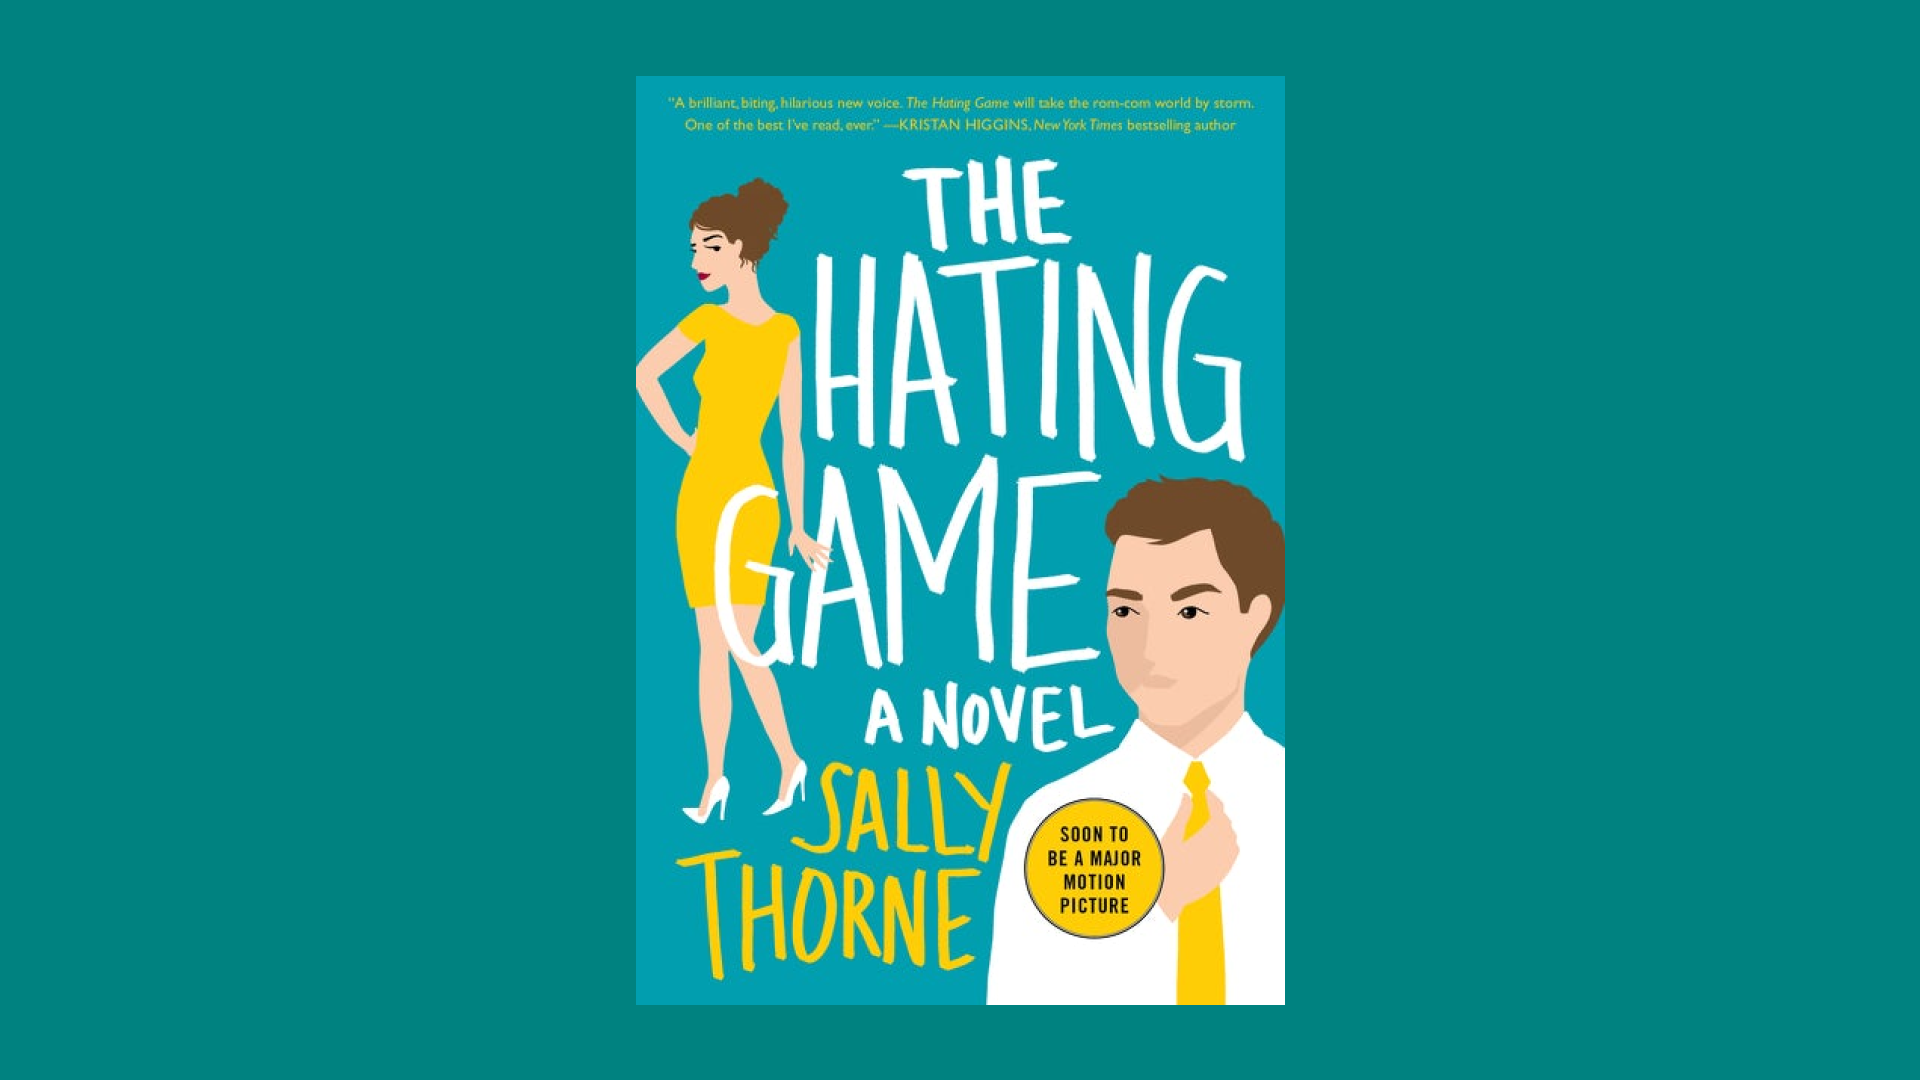 “The Hating Game” by Sally Thorne